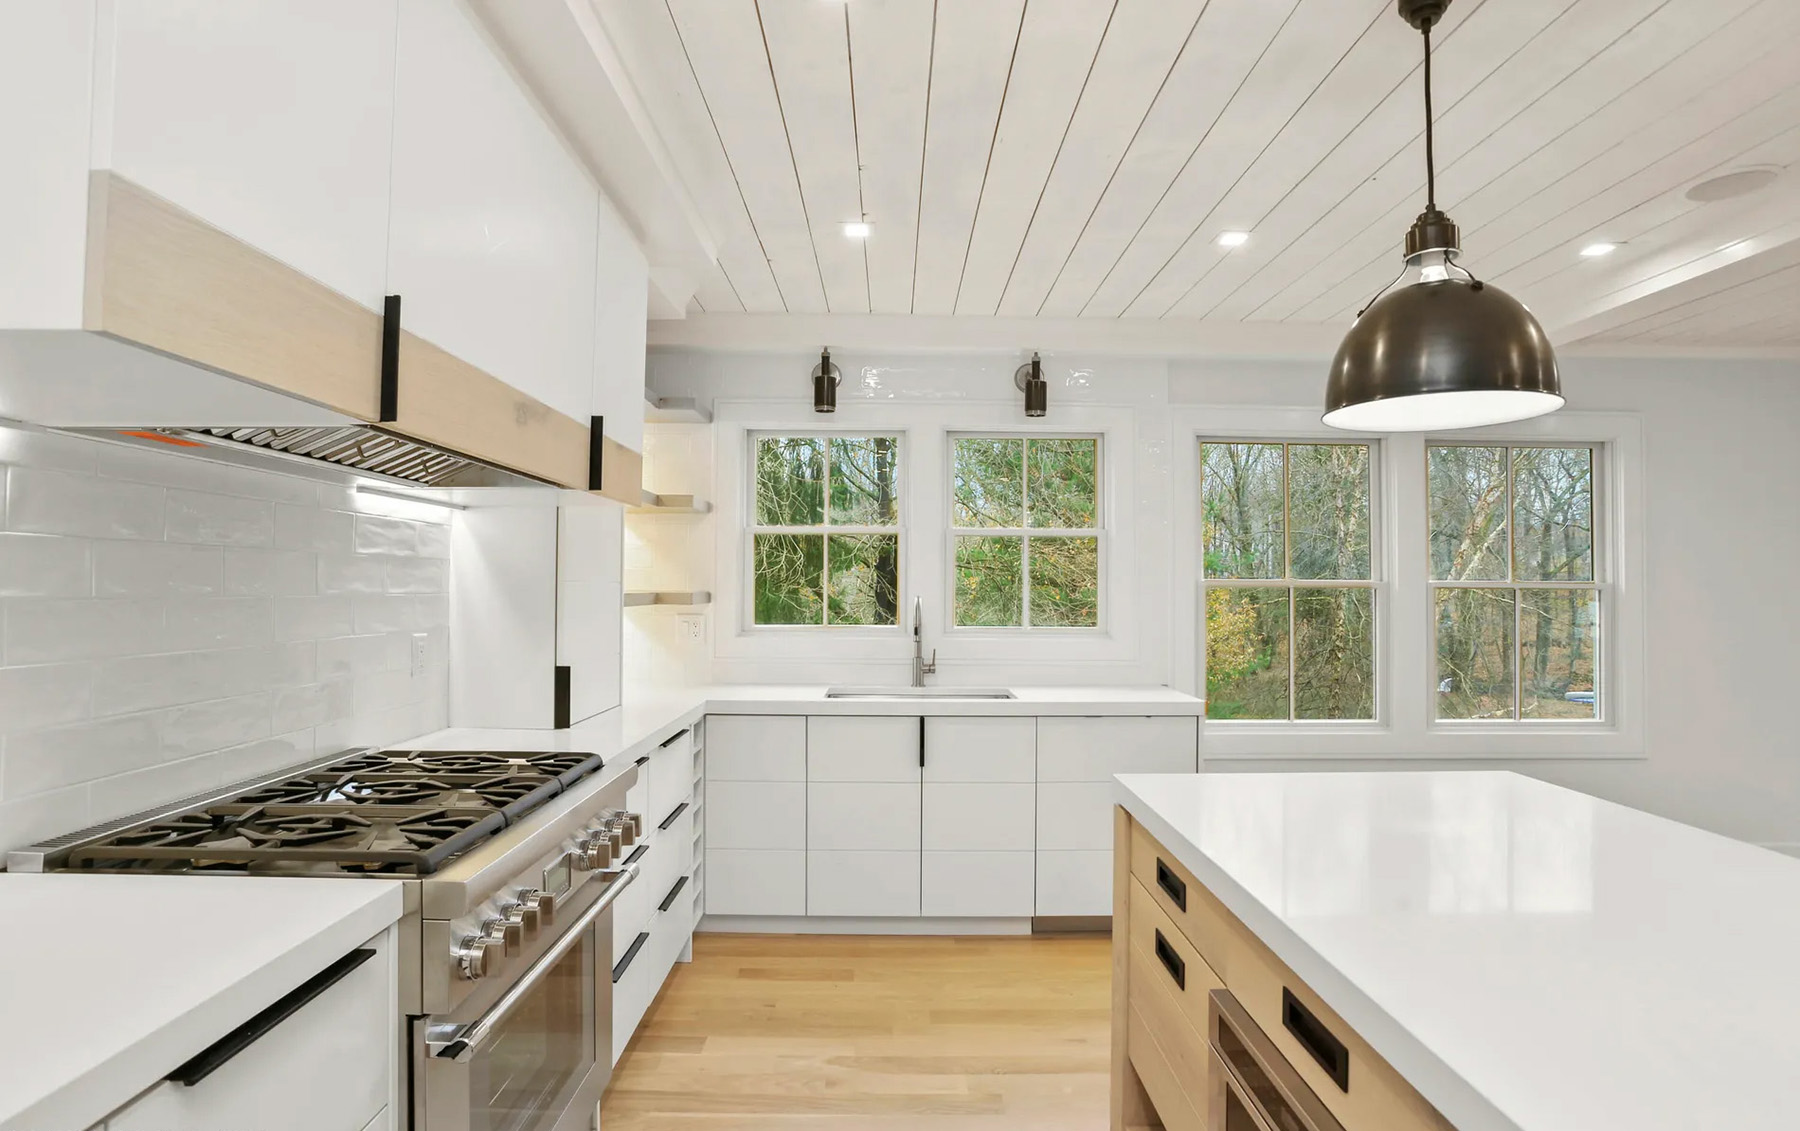 Tongue and groove kitchen ceiling painted white.